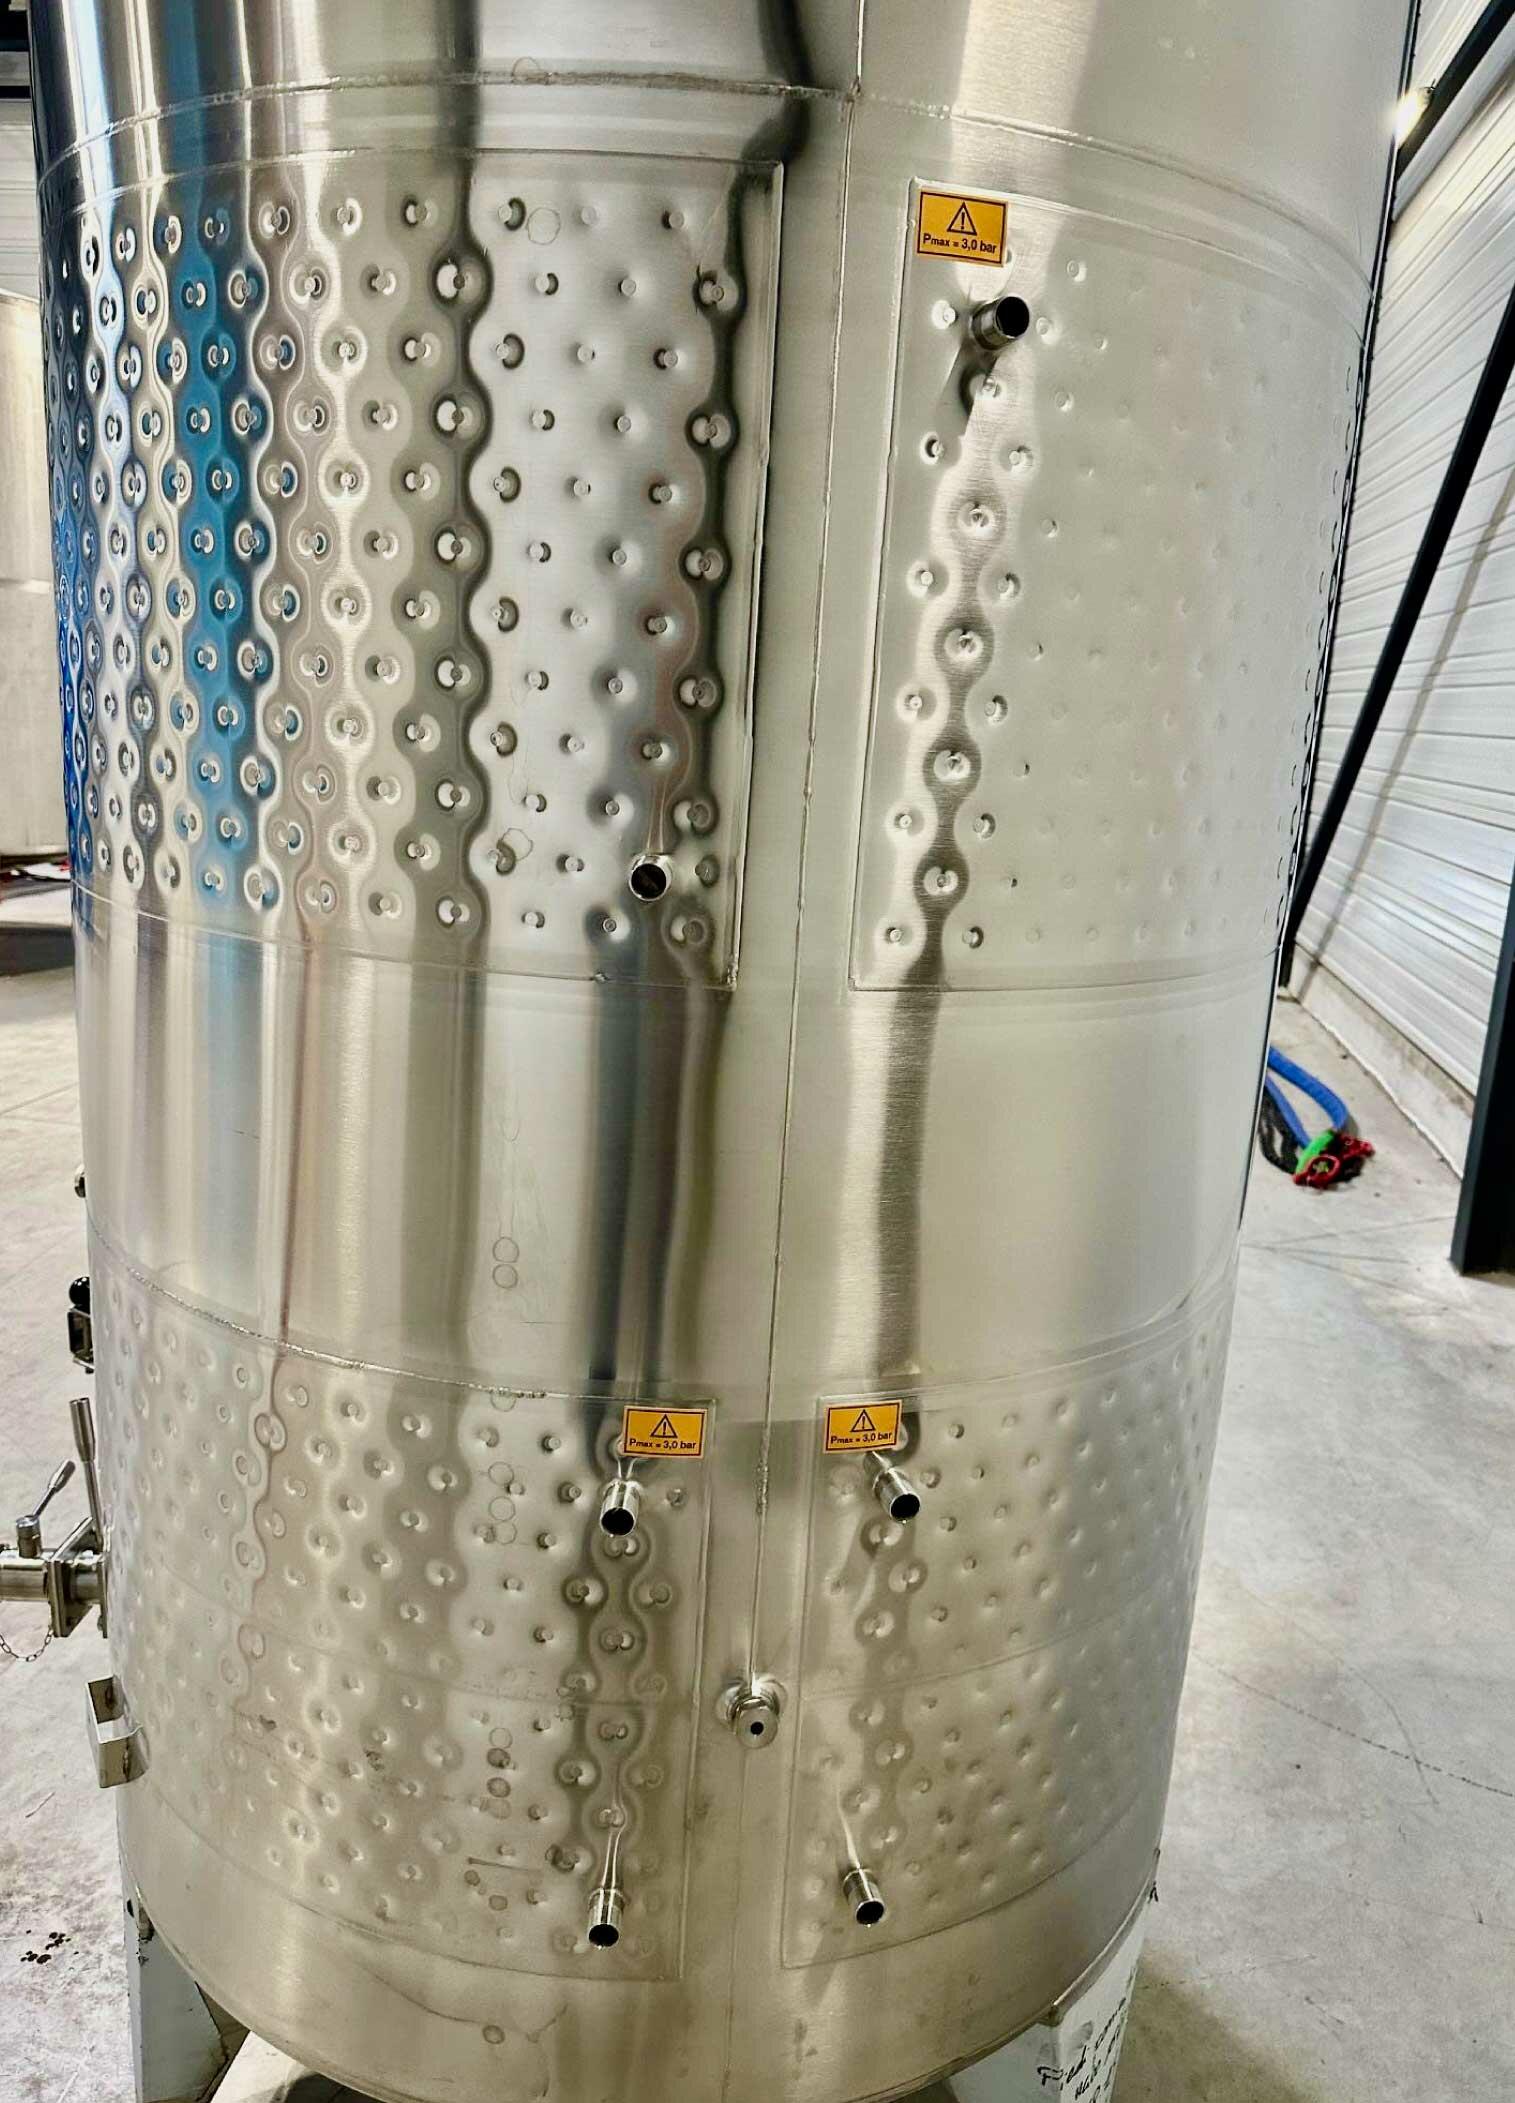 316L stainless steel tank - Honeycomb circuit - Domed bottom - Floating top